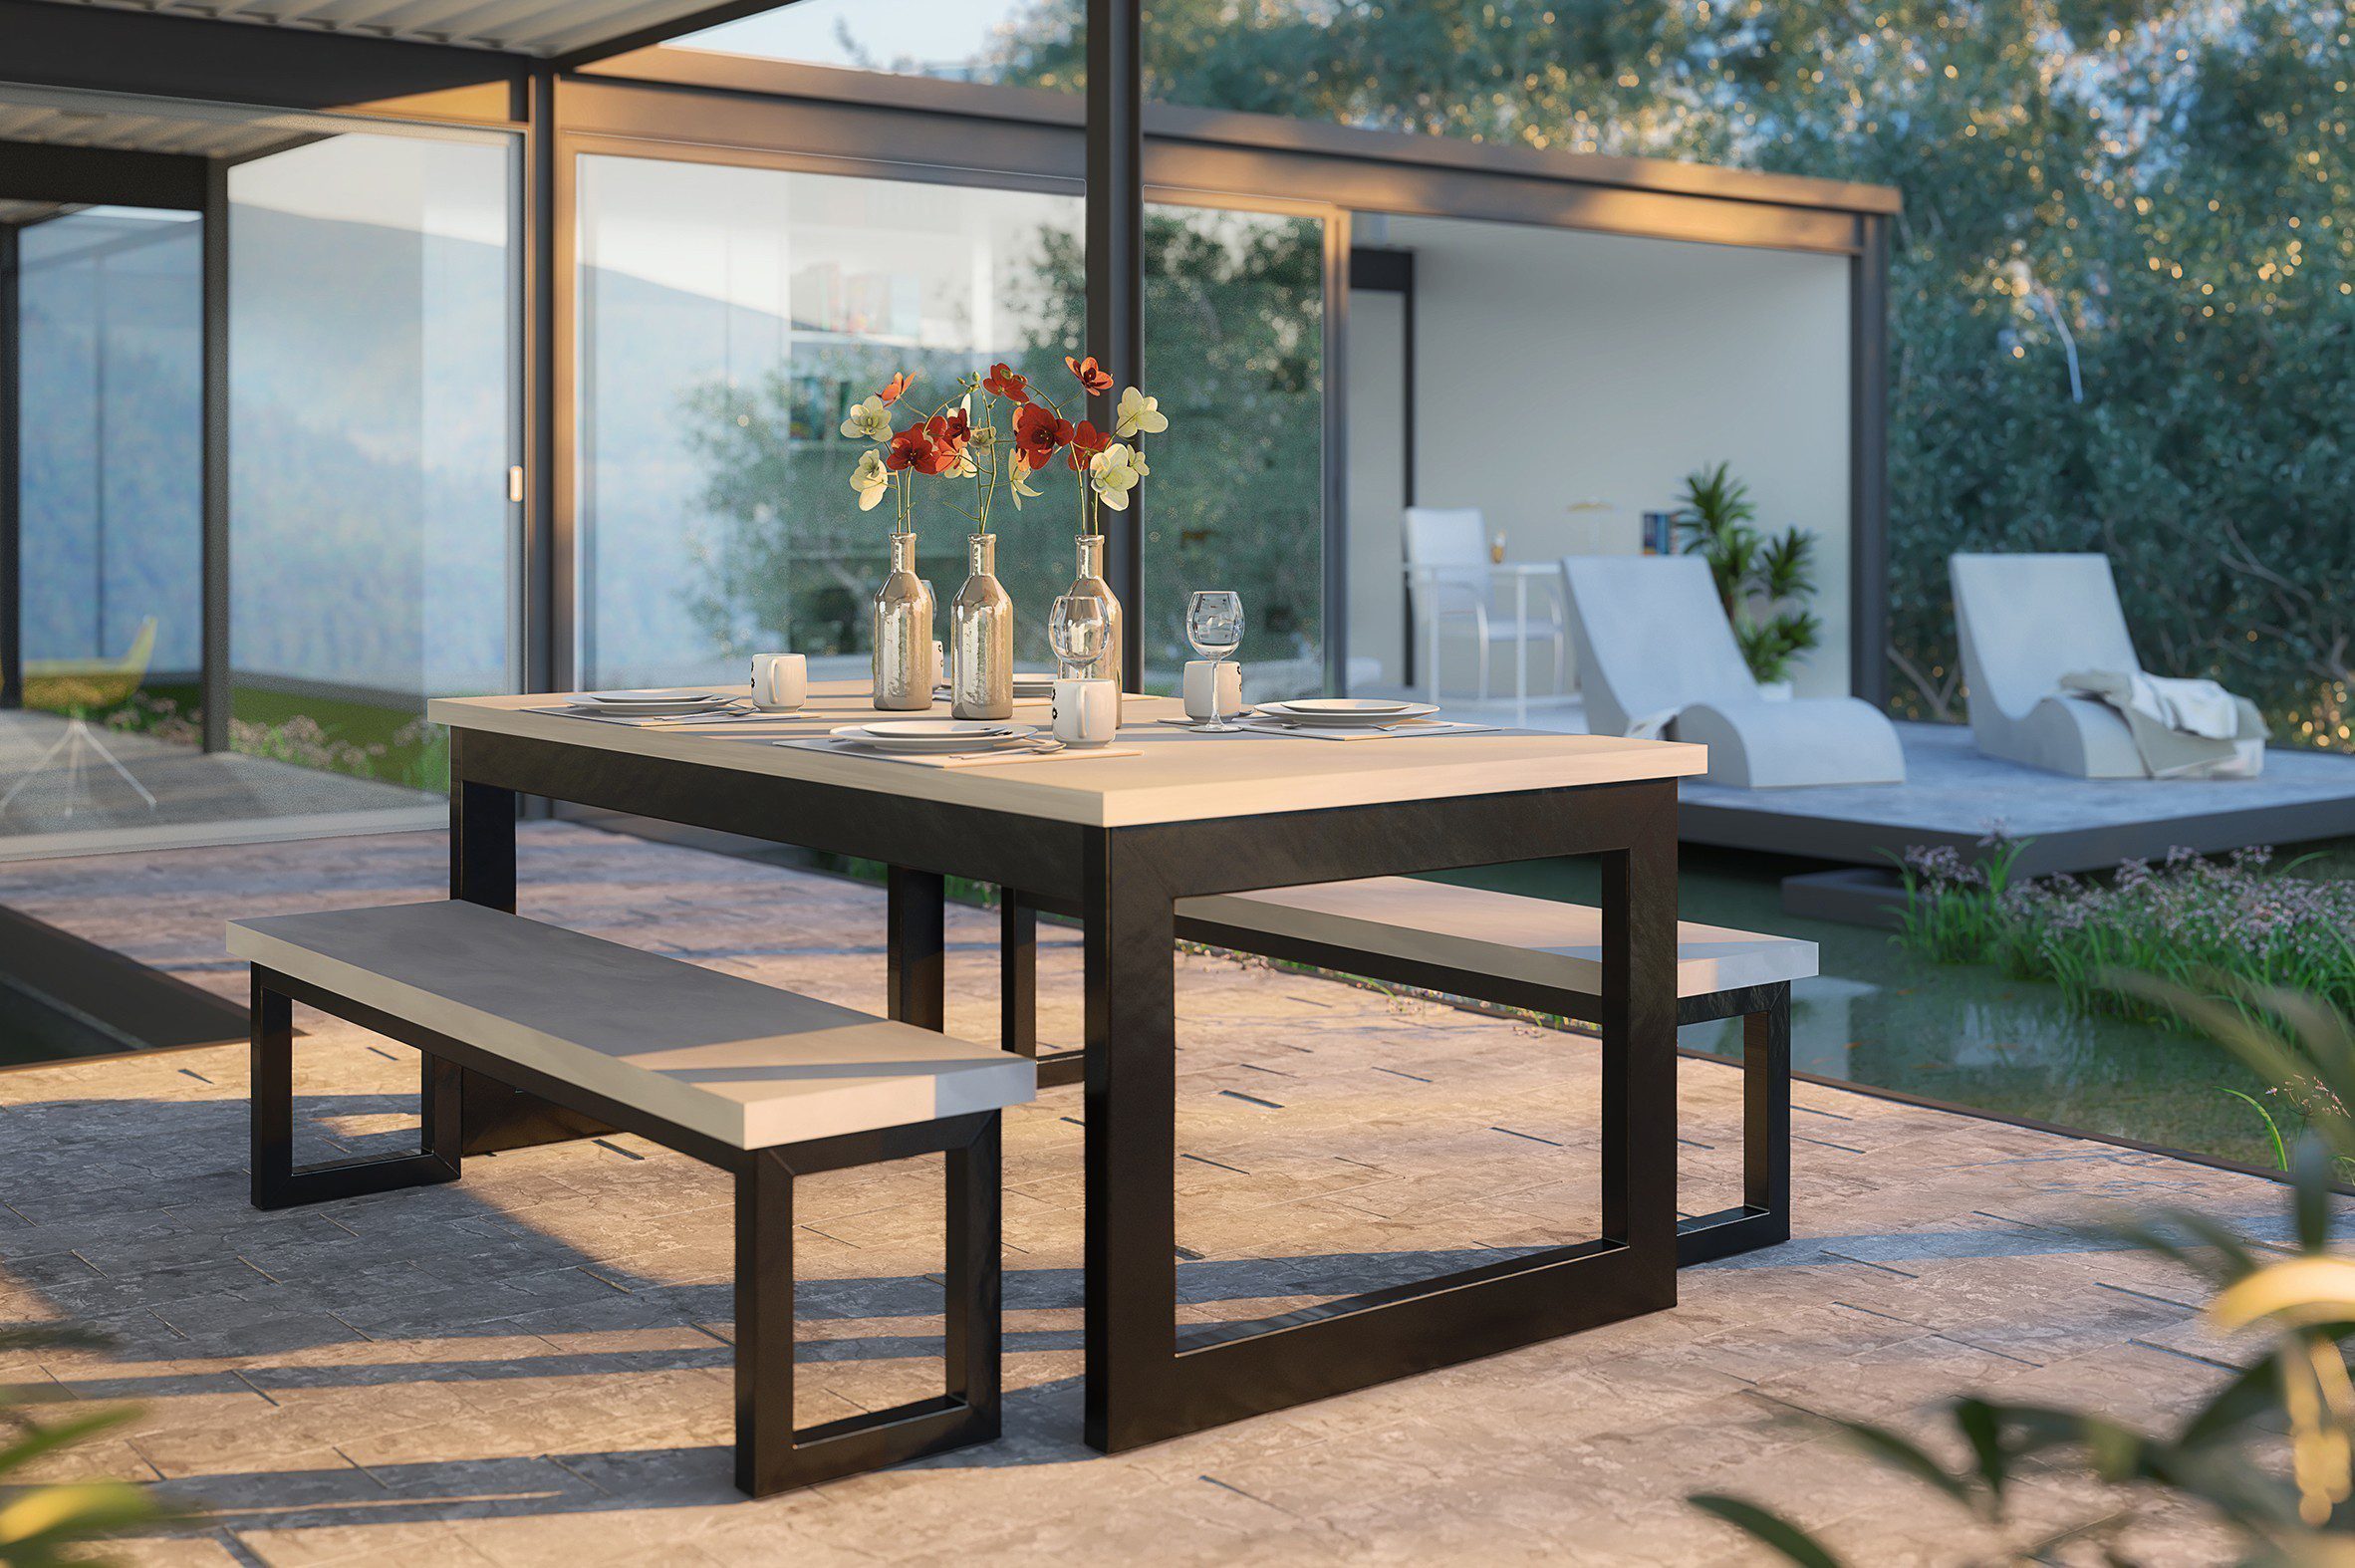 Microcement table, Dinning table, Concrete Table, Steel and concrete table